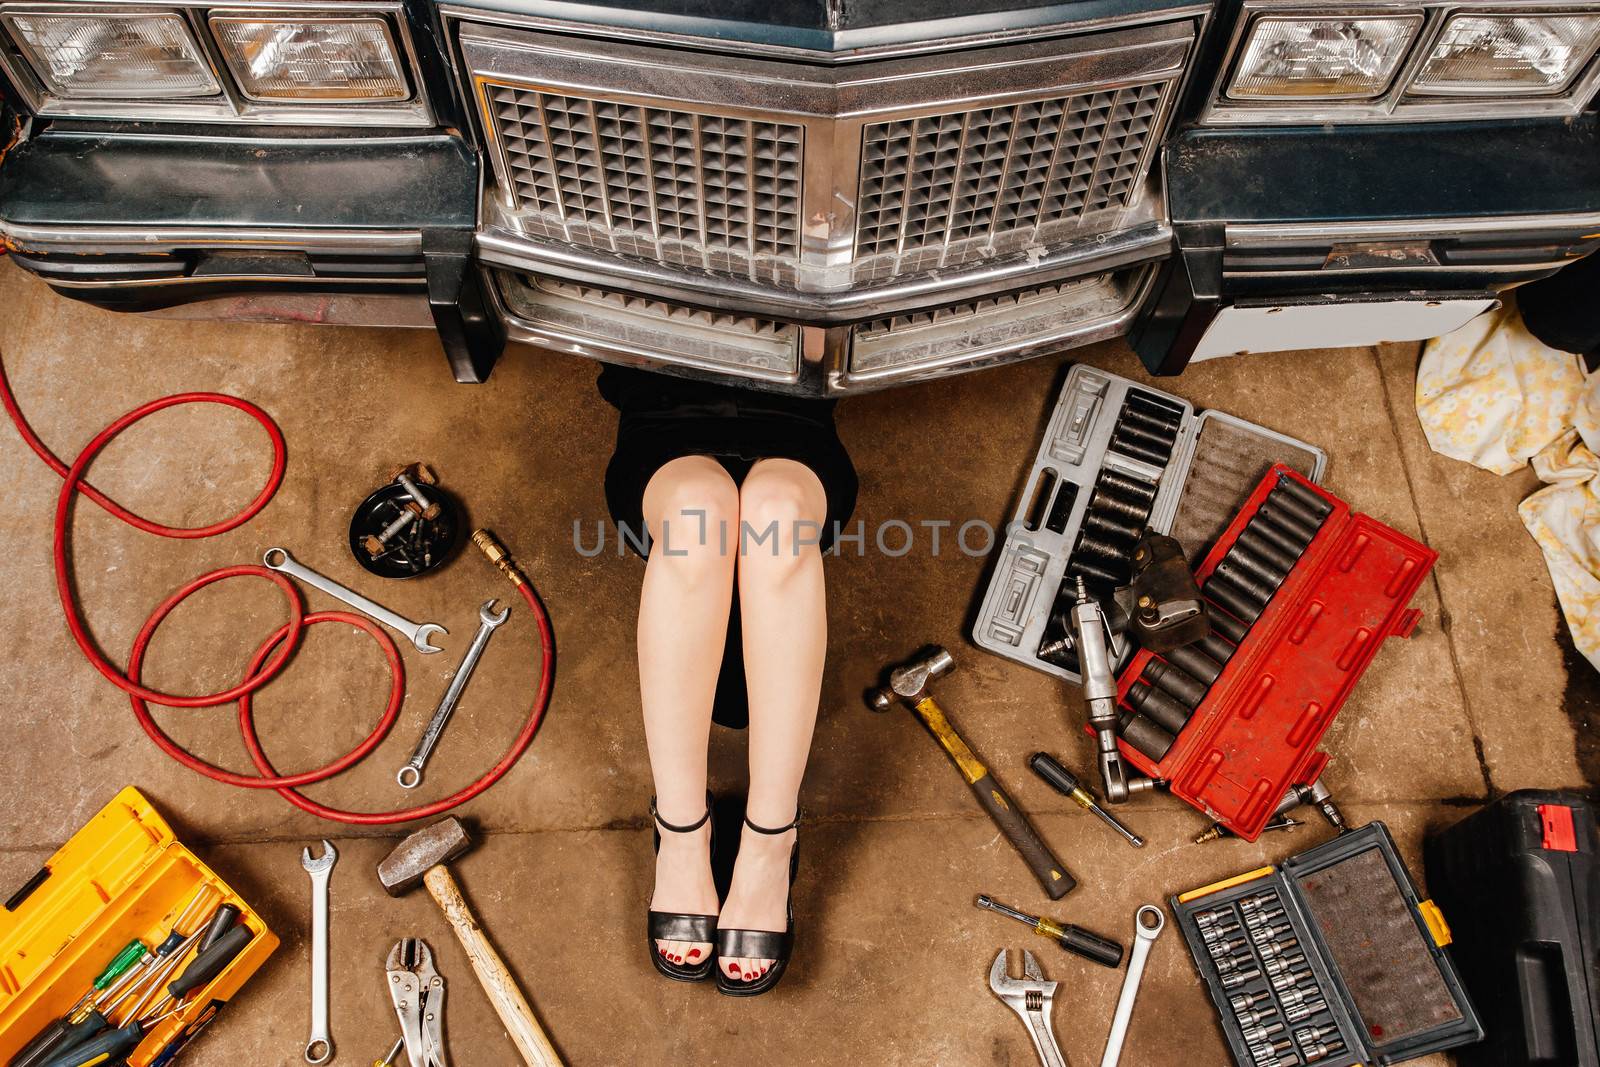 A woman wearing a black skirt and heels doing repairs under the front of an old car from the early 80's.